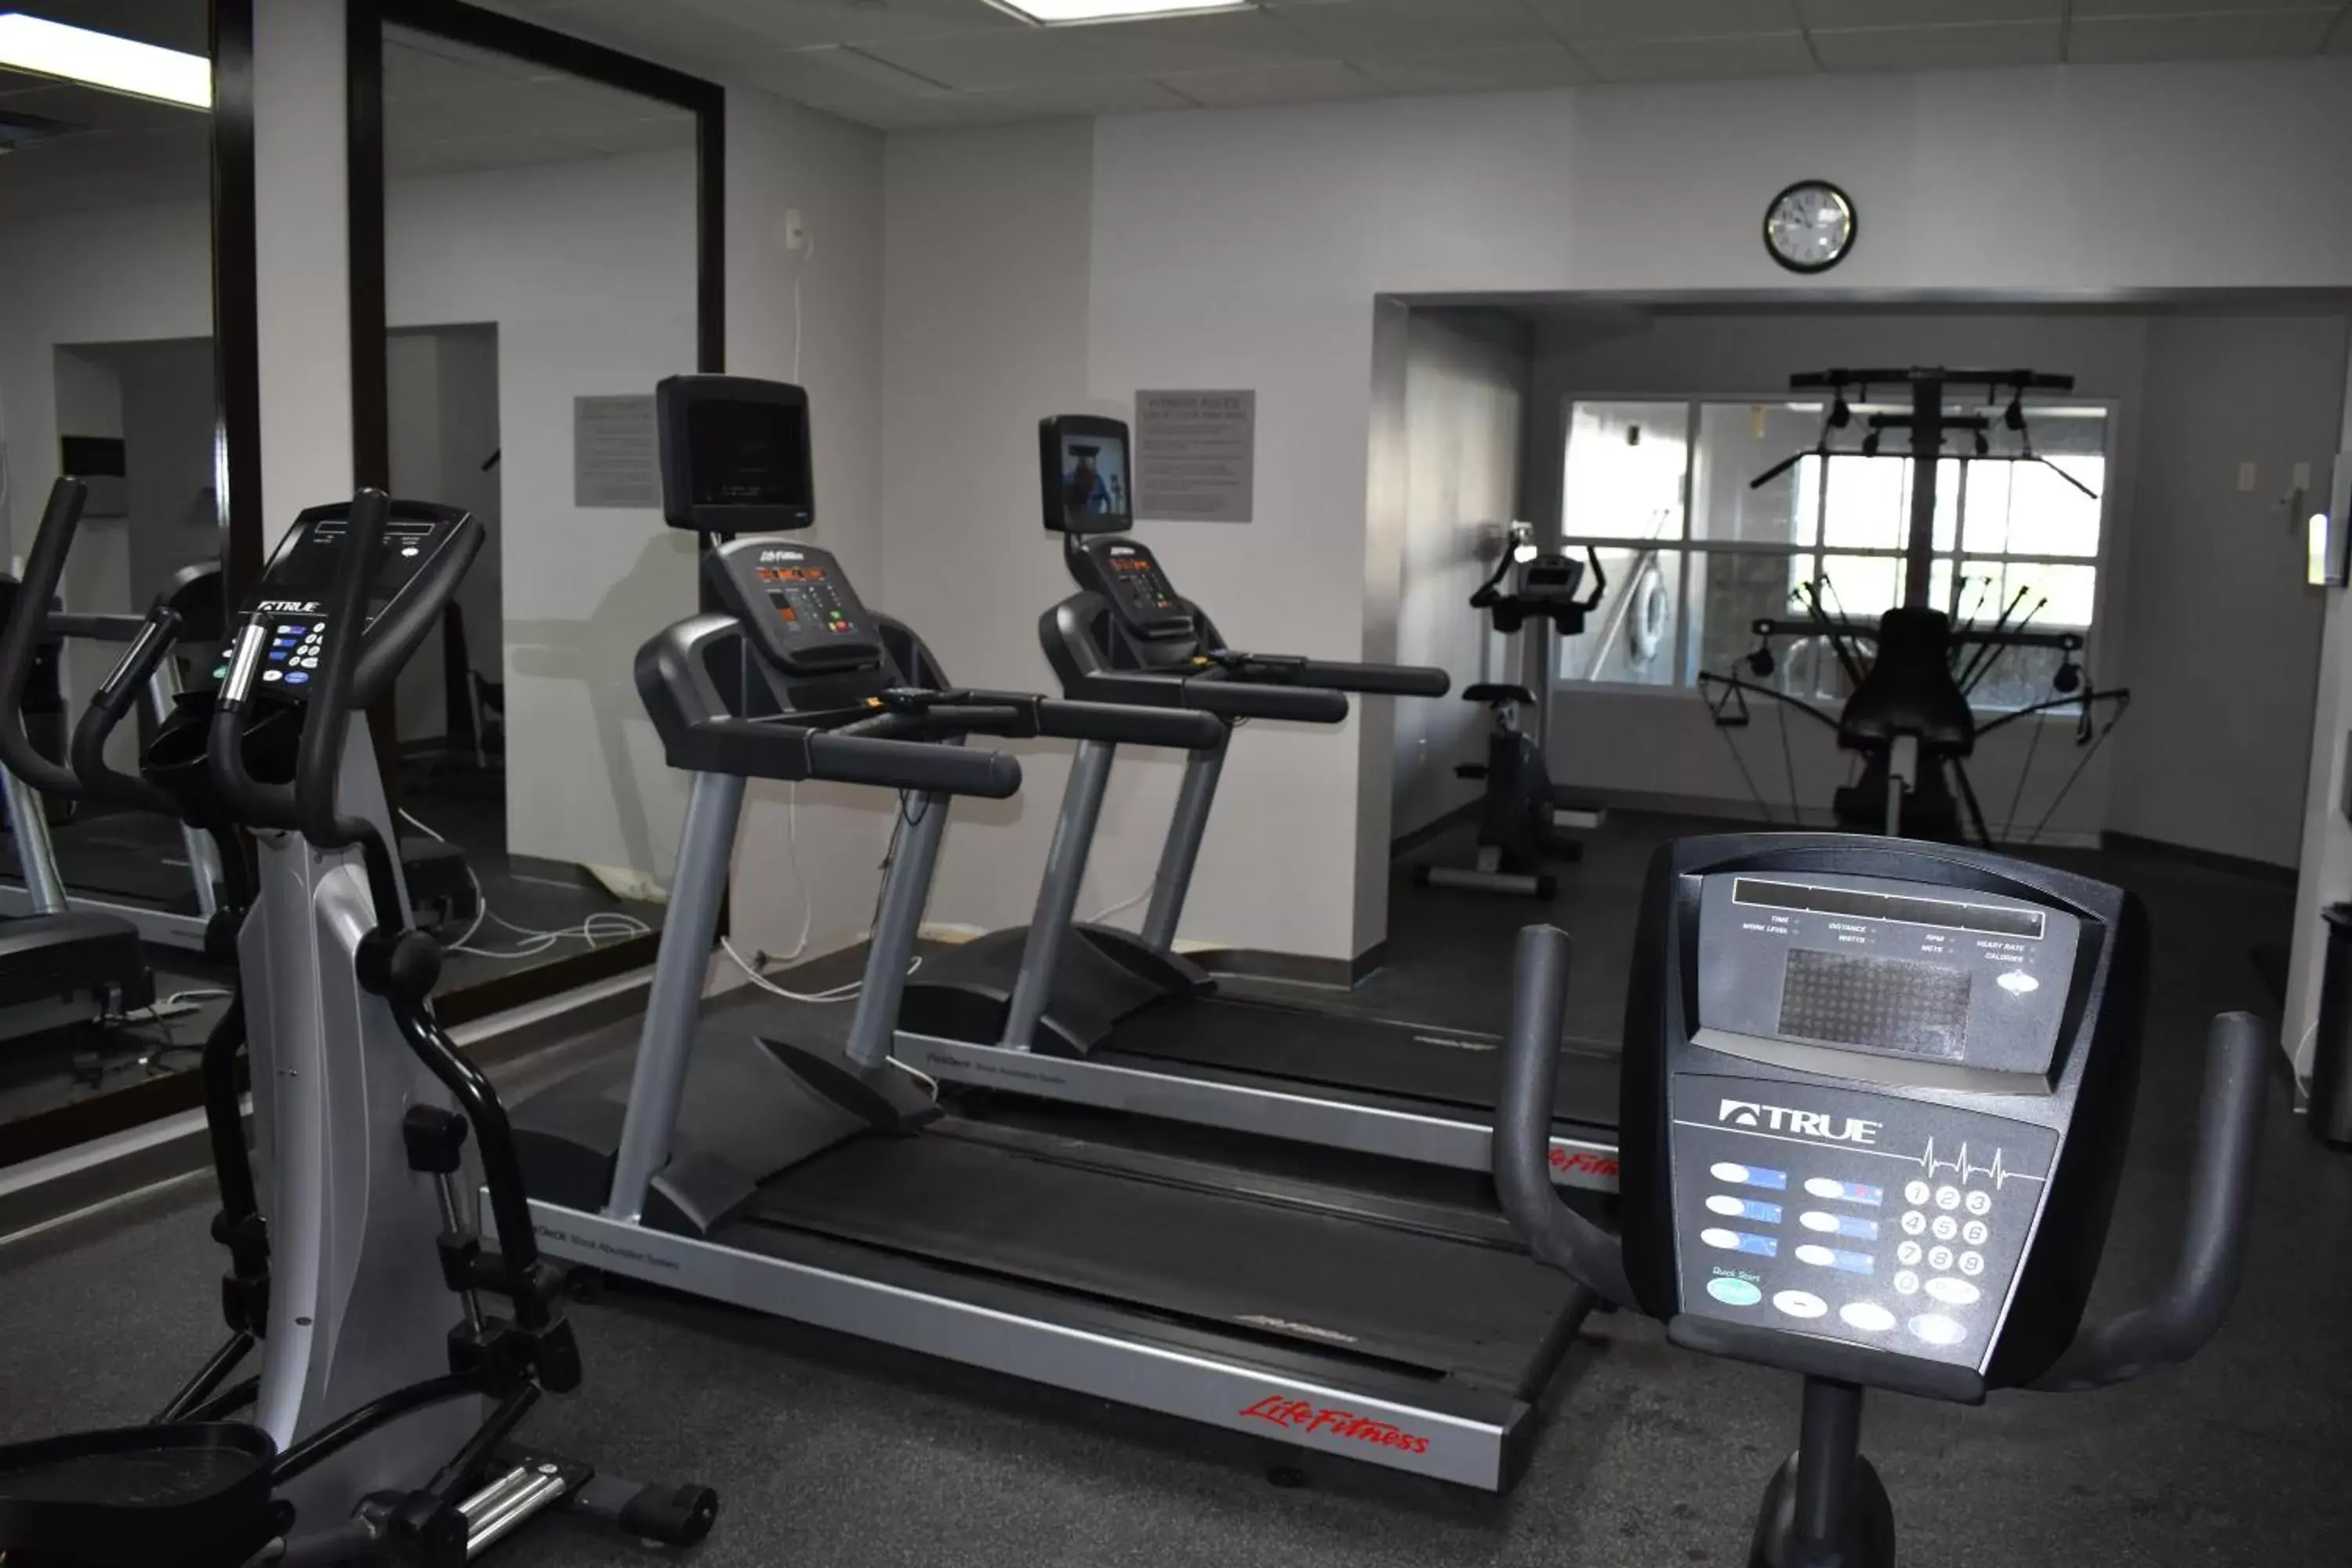 Fitness centre/facilities, Fitness Center/Facilities in Country Inn & Suites by Radisson, Hagerstown, MD